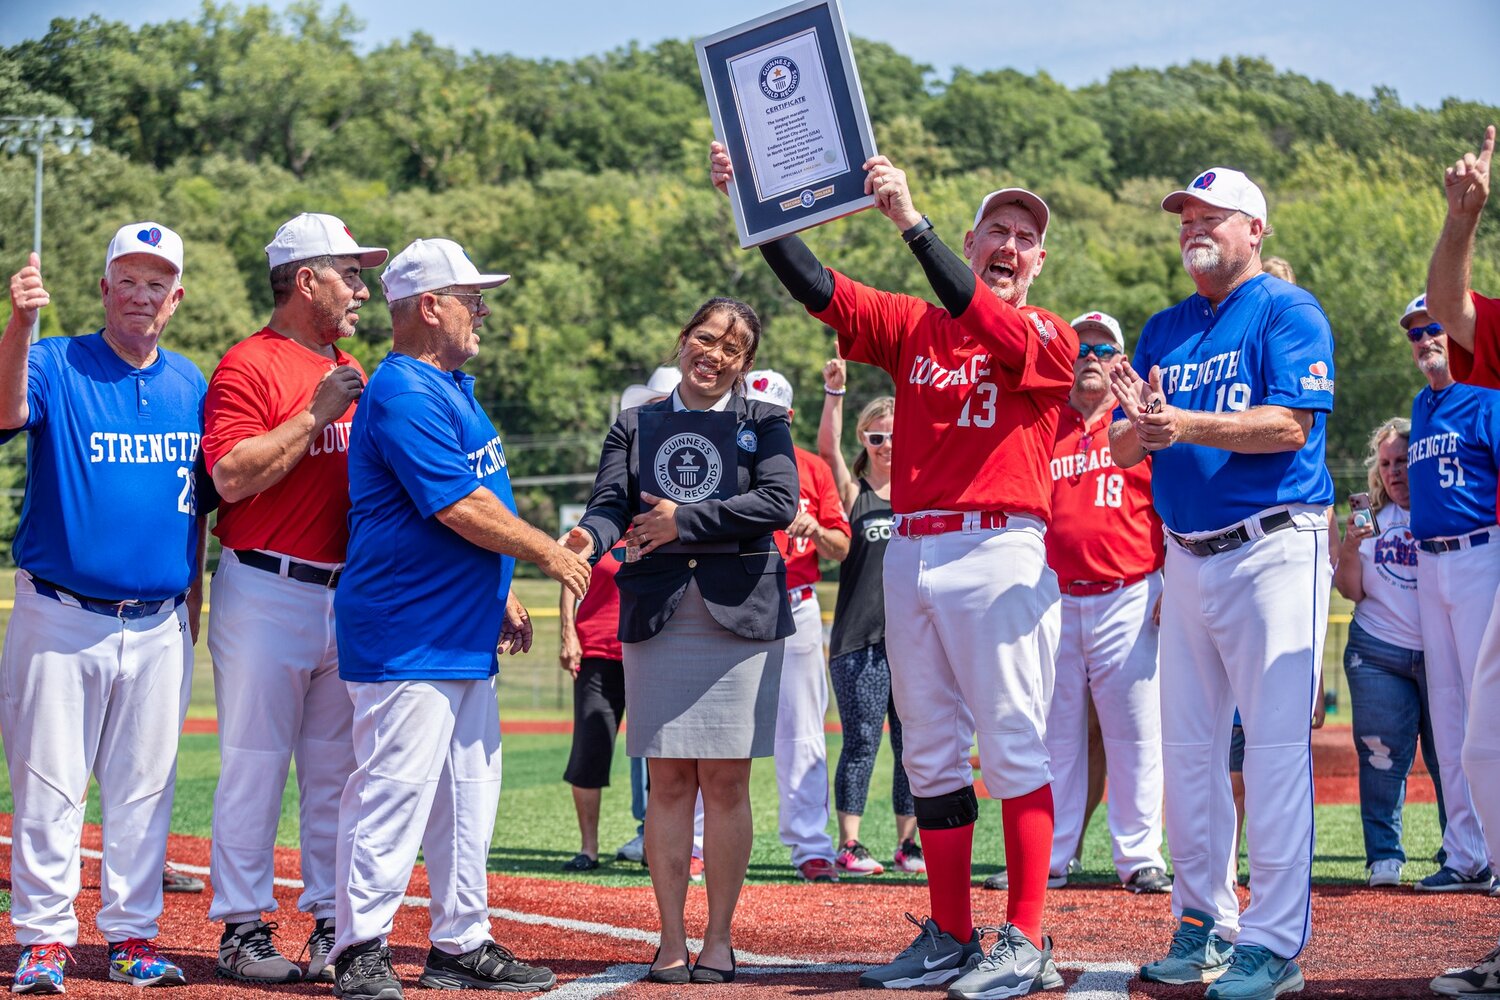 The Endless Game board members accepted the certificate from the Guinness Adjudicator for their world record longest marathon baseball game in Kansas City surrounded by family, friends, volunteers and fellow players.  Left to right: Bill Hutton, Jessie Aguirre, Jerry Weaver, World Record adjudicator Natalia Ramirez Talero, Soctt Reinardy and Ron Humble.